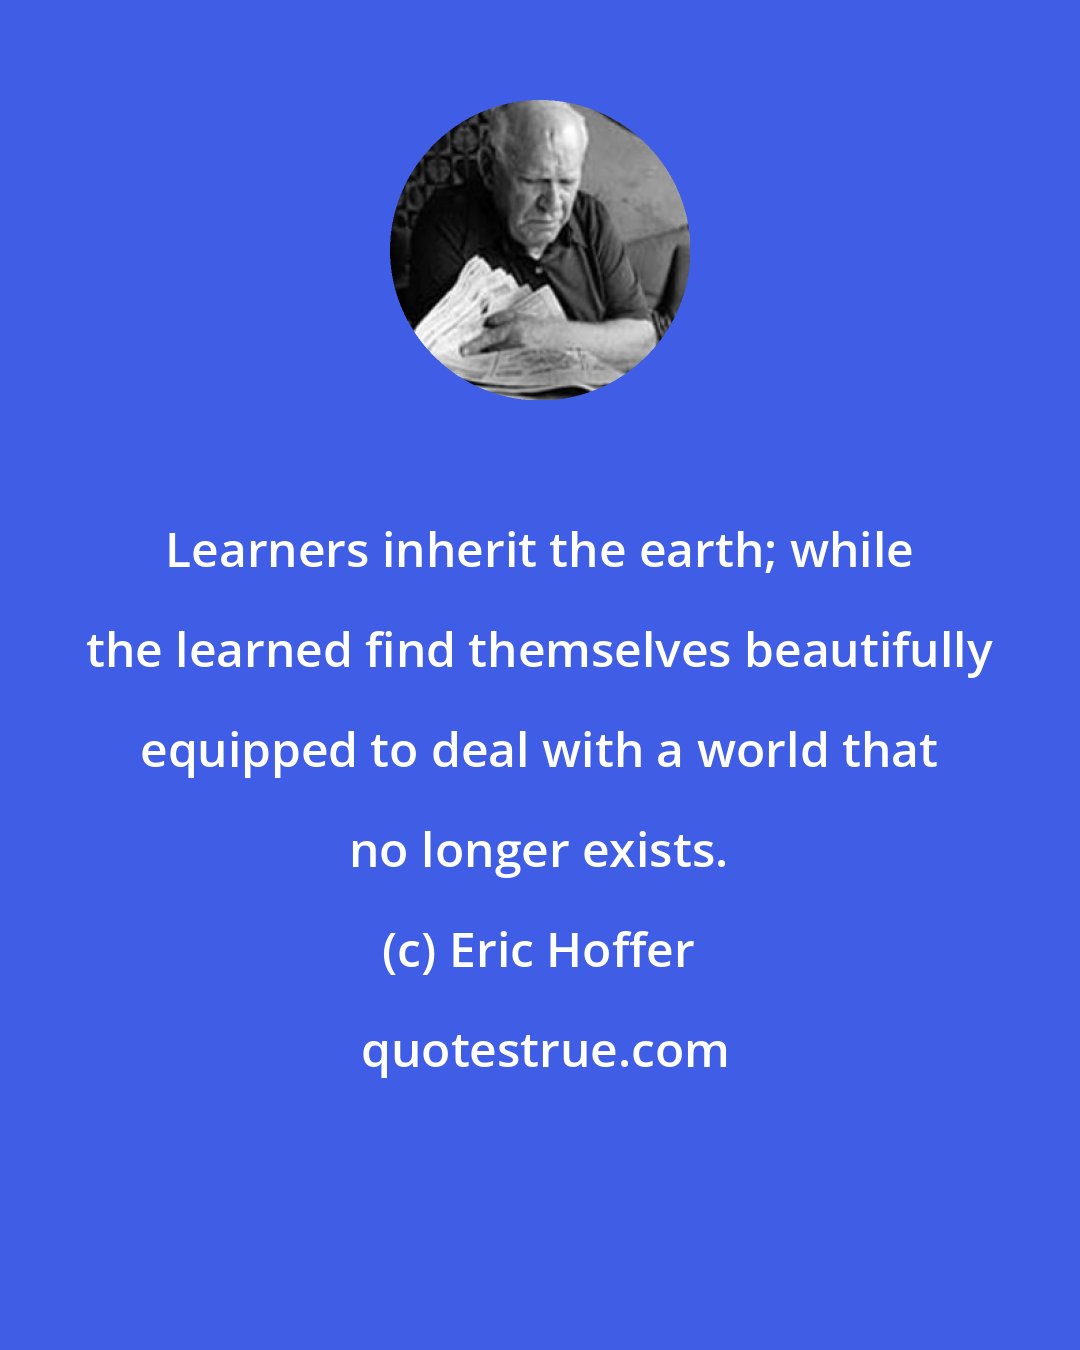 Eric Hoffer: Learners inherit the earth; while the learned find themselves beautifully equipped to deal with a world that no longer exists.